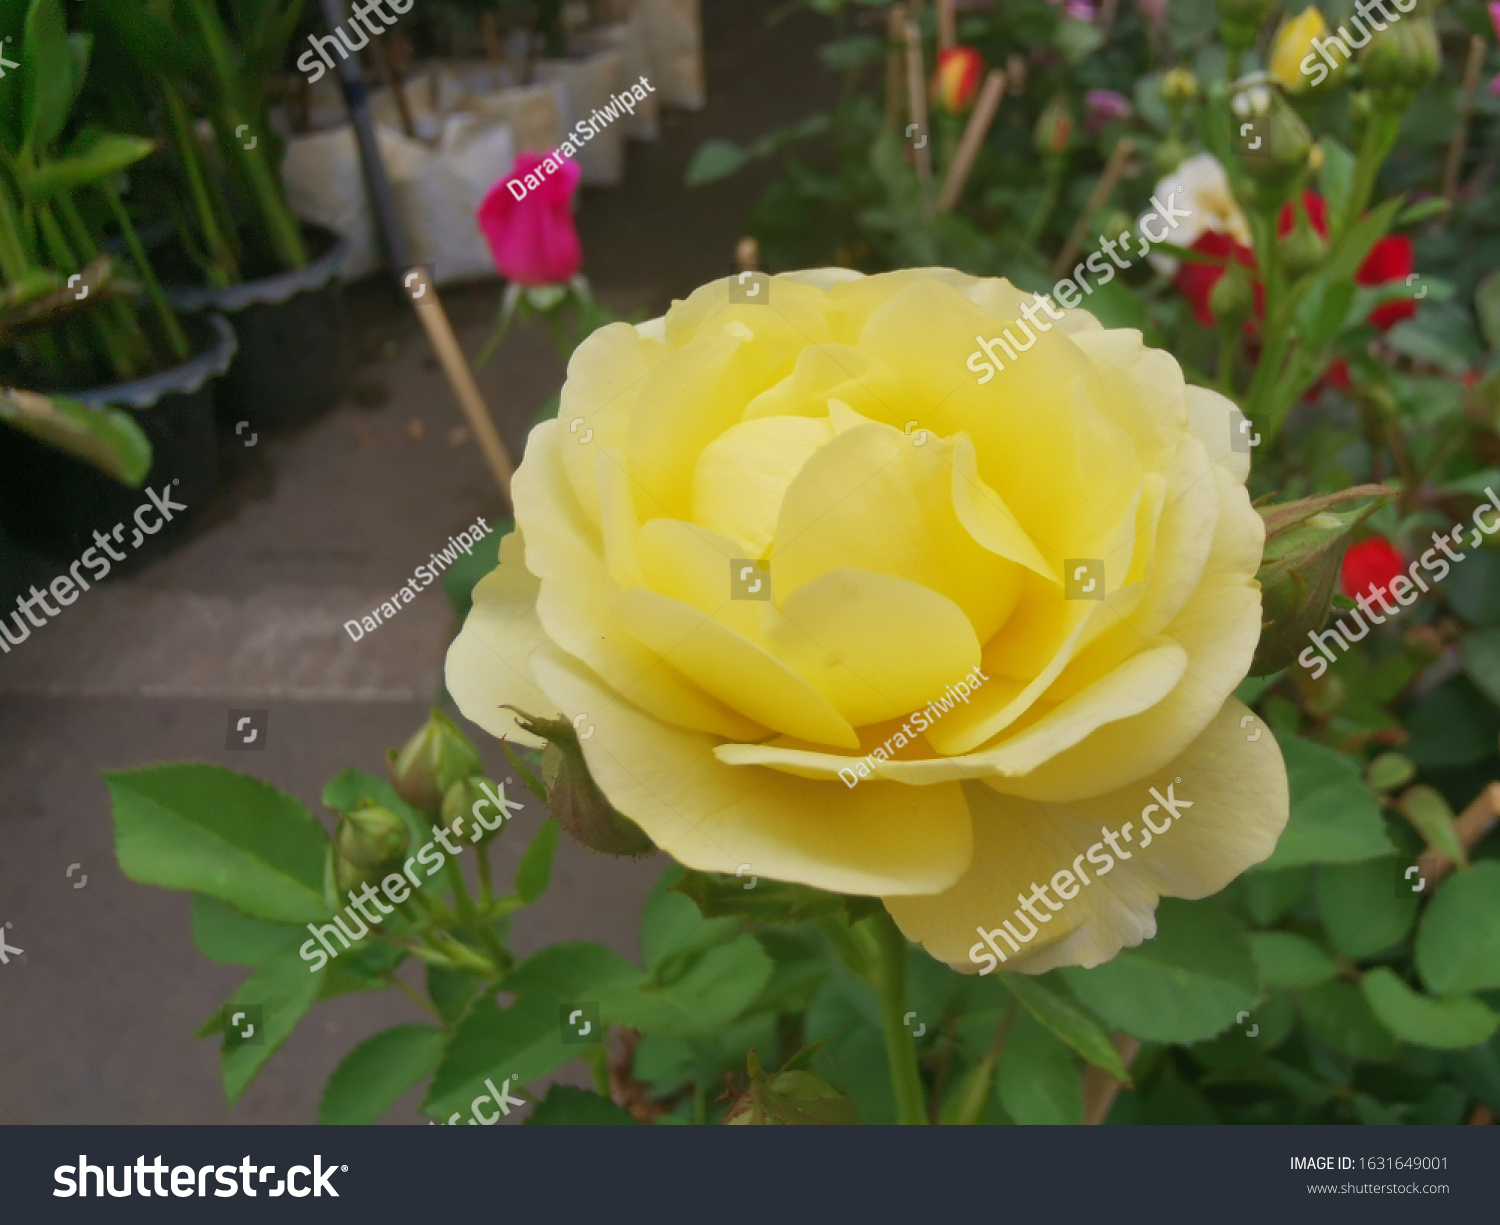 Small yellow roses, tightly stacked petals, rubber petals in full bloom. #1631649001